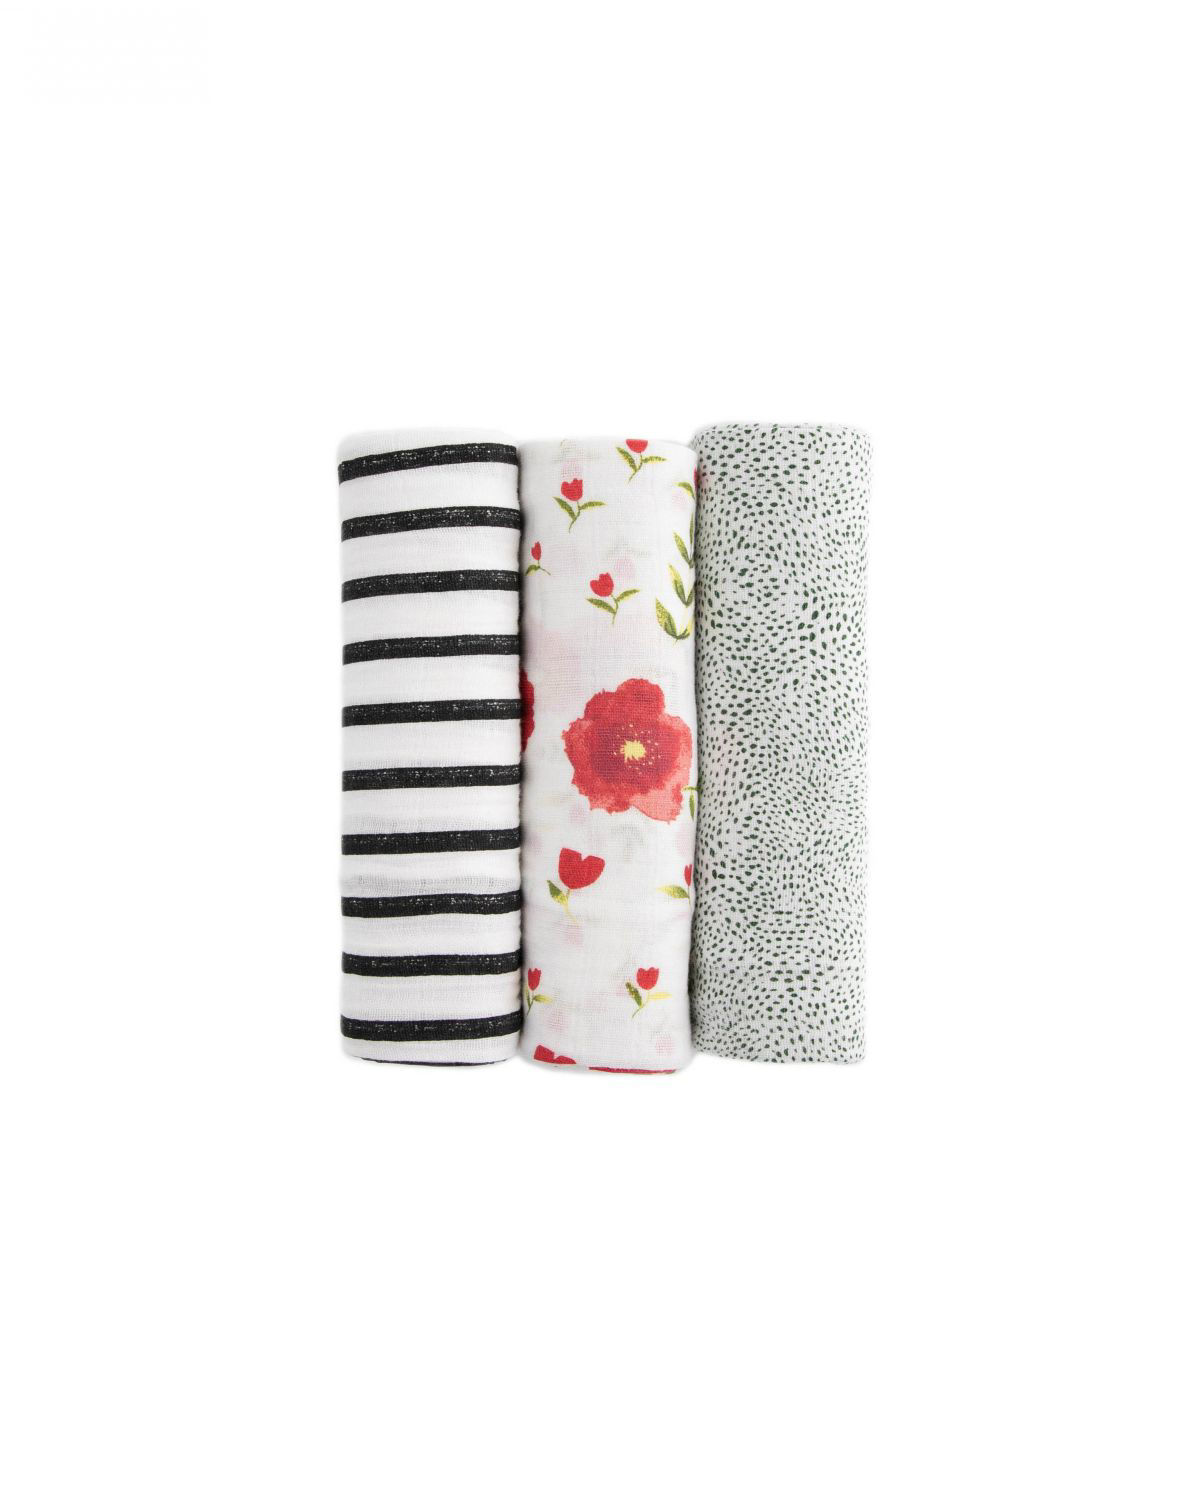 French Floral Silky Soft Swaddle 3 Pack